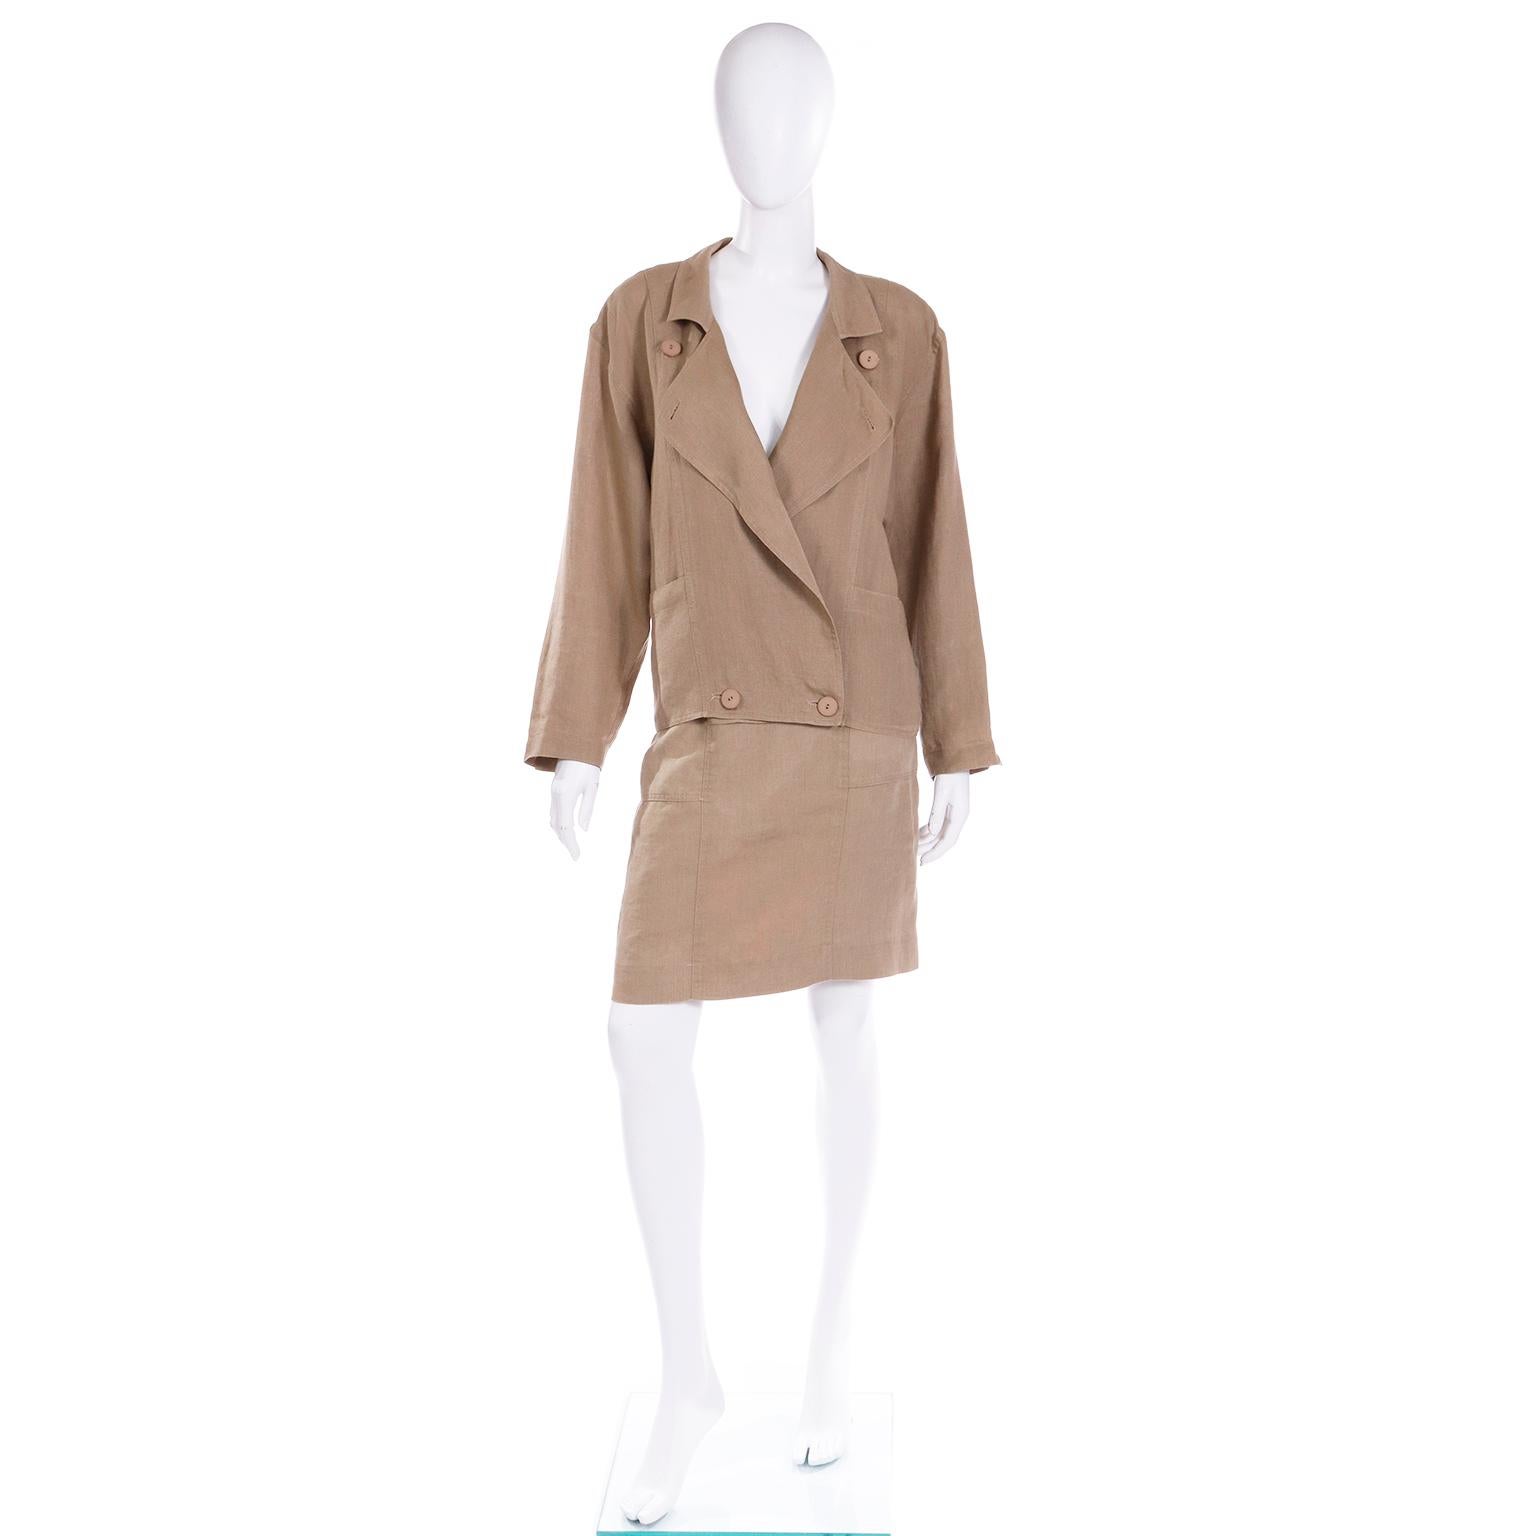 This 1980's vintage Escada Margaretha Ley khaki tan flax linen 2 piece suit includes a notched collar jacket and a pencil skirt.
The loose fitted, unlined jacket is labeled a size 36 and has hip patch pockets. This effortless jacket has long sleeves